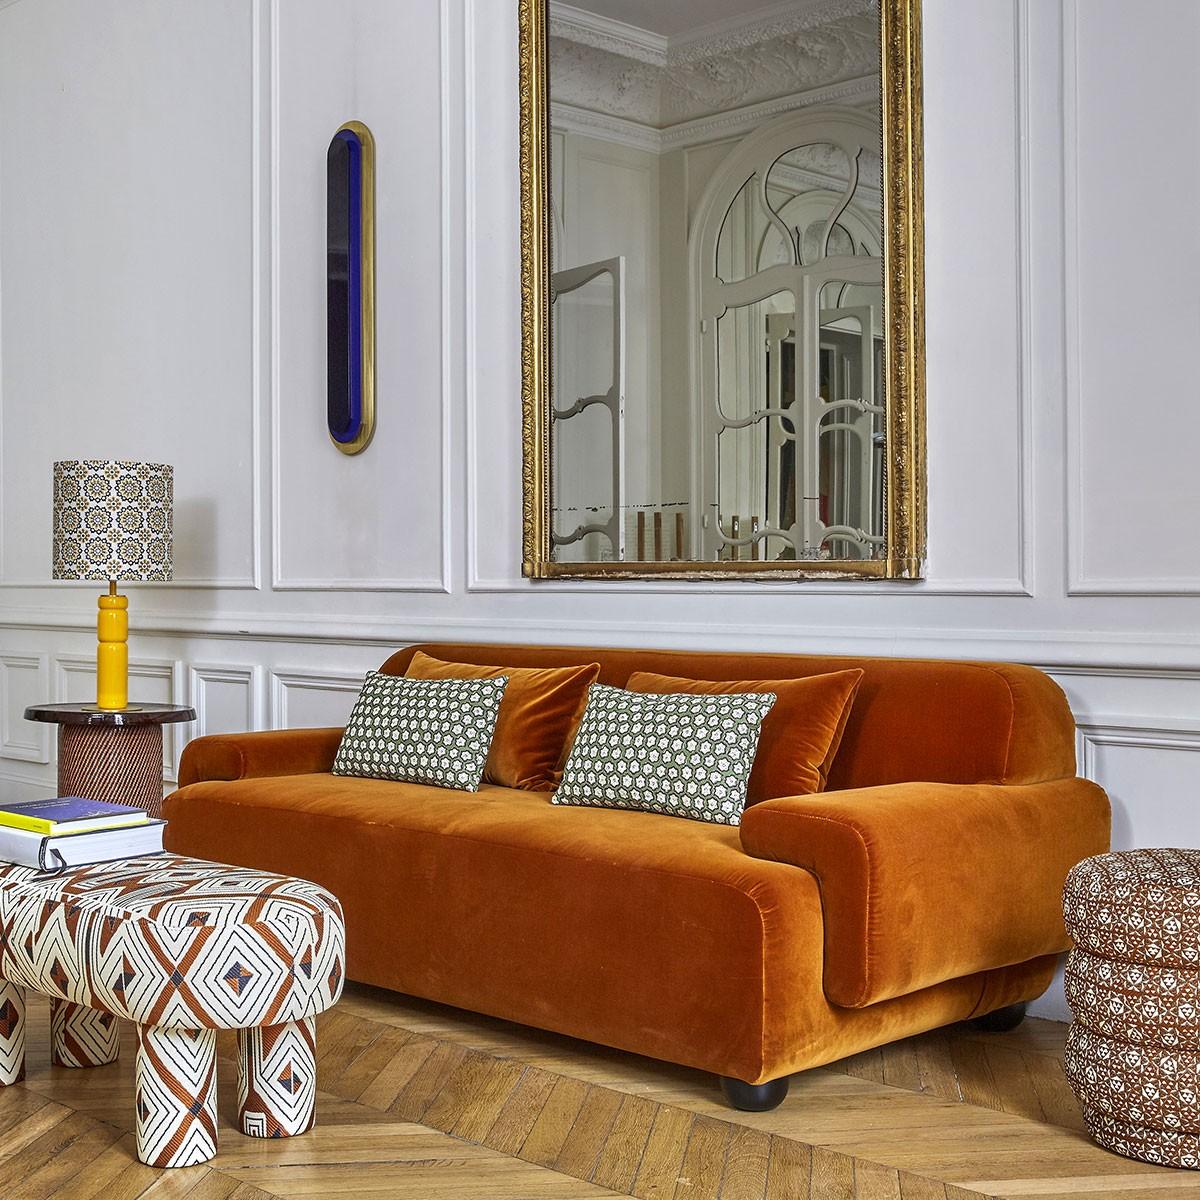 Popus Editions Lena 2.5 seater sofa in Yellow Como Velvet Upholstery

It looks like it's straight out of a movie, with its generous curves and wide armrests. It is a real invitation to spend long Sundays with the family, comfortably seated in